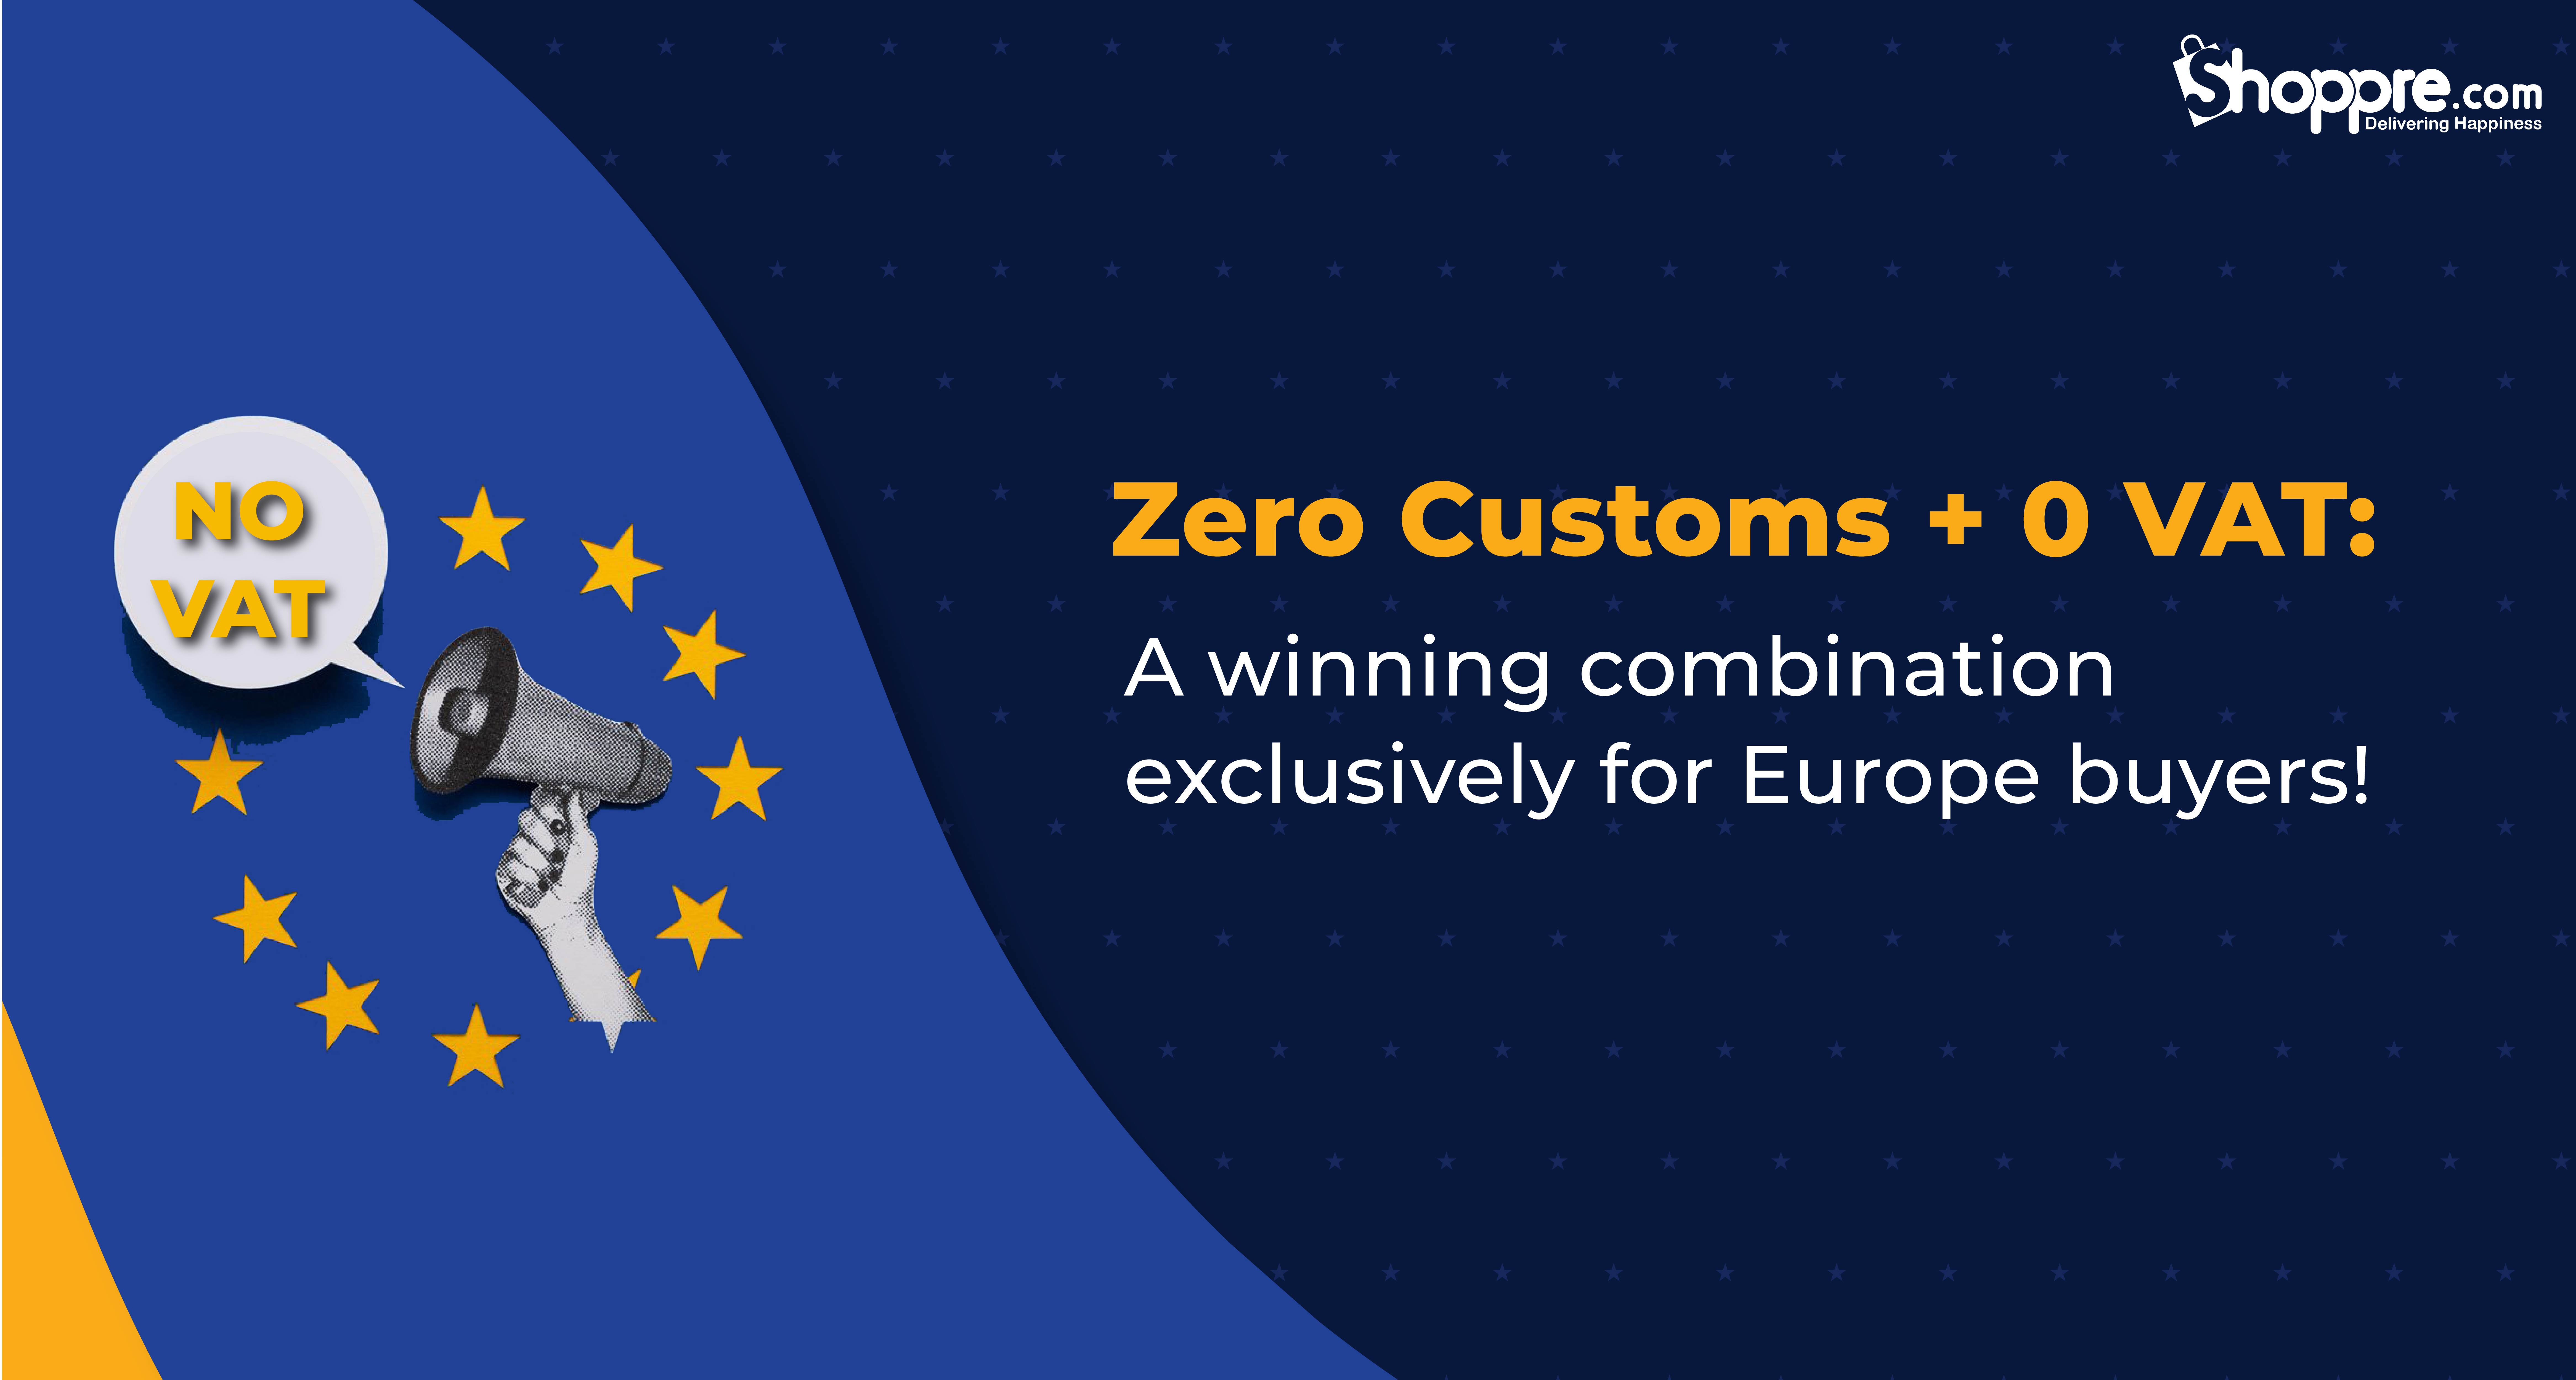 Hassle-free Customs and VAT-free Shipping to Europe with Shoppre.com